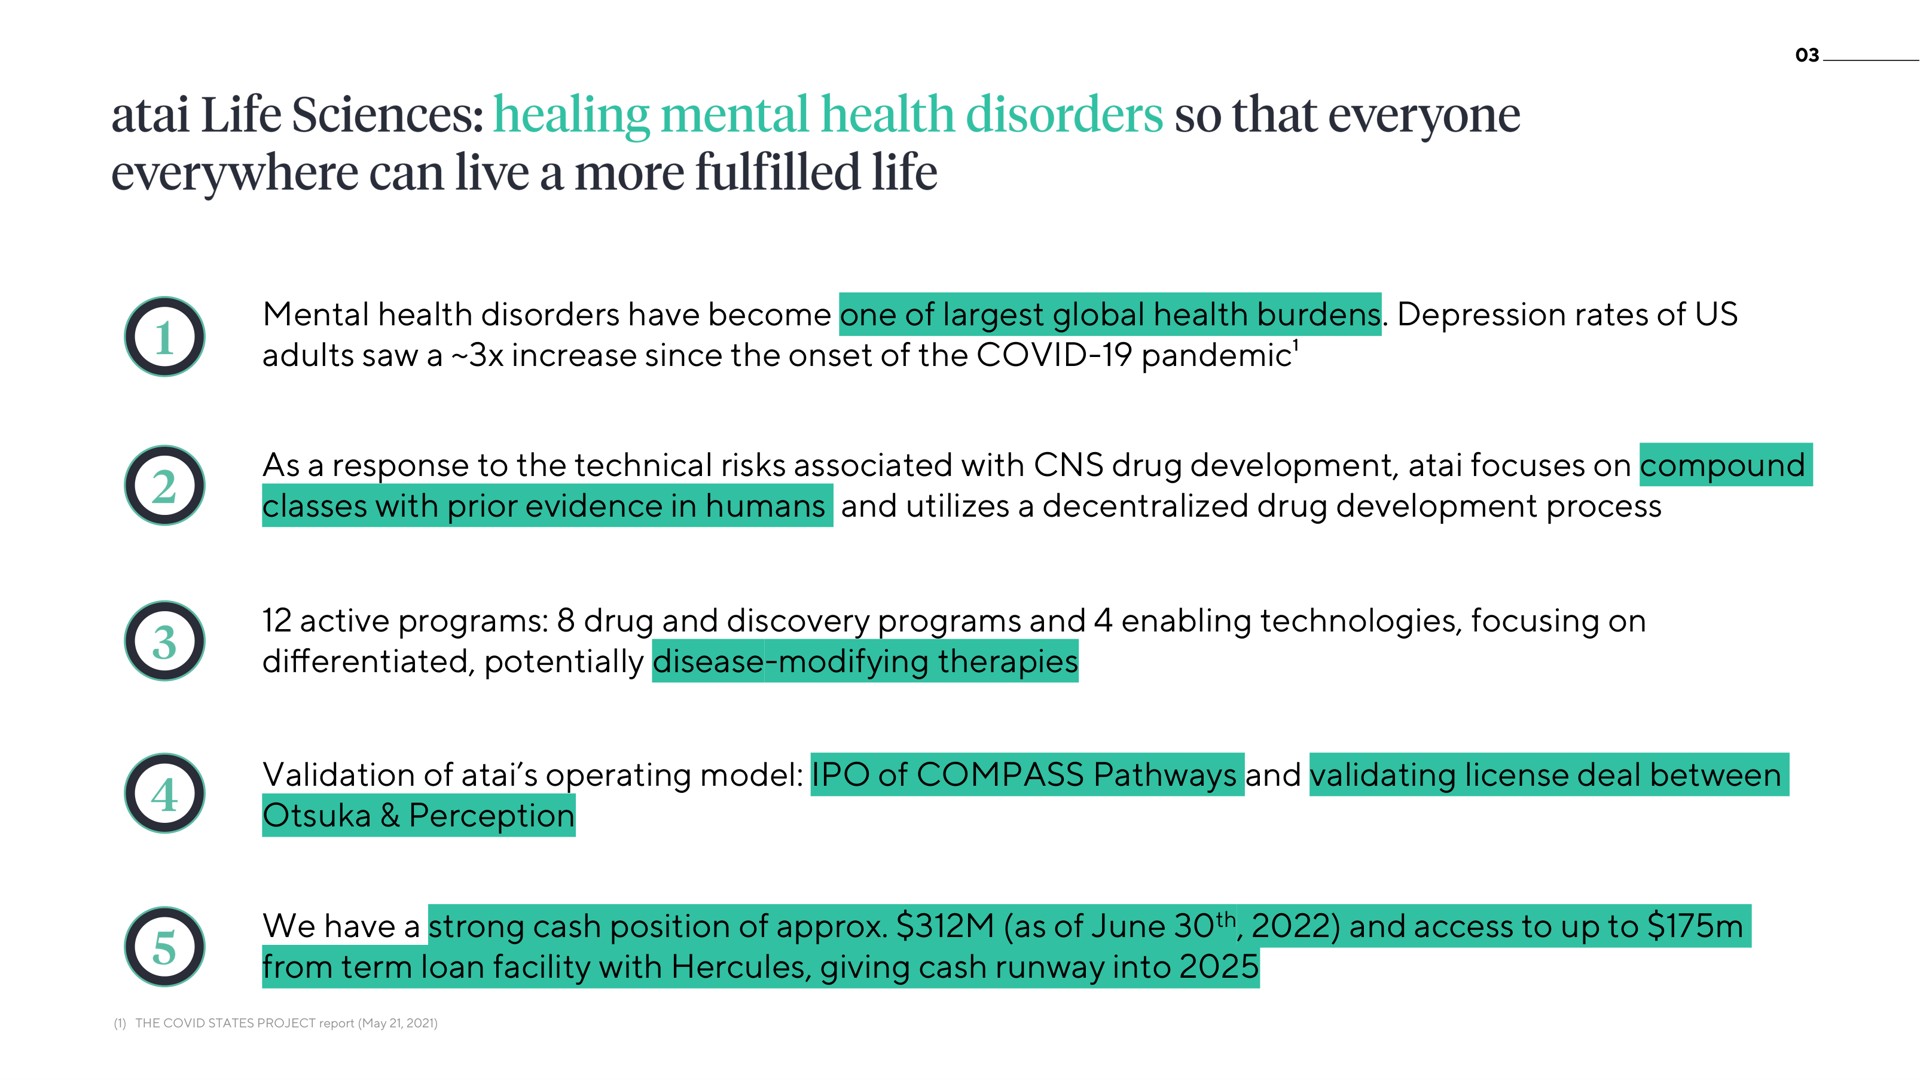 mental health disorders have become one of global health burdens depression rates of us adults saw a increase since the onset of the covid pandemic as a response to the technical risks associated with drug development focuses on compound classes with prior evidence in humans and utilizes a decentralized drug development process active programs drug and discovery programs and enabling technologies focusing on potentially disease modifying therapies validation of operating model of compass pathways and validating license deal between perception we have a strong cash position of as of june and access to up to from term loan facility with giving cash runway into life sciences healing so that everyone everywhere can live more life | ATAI